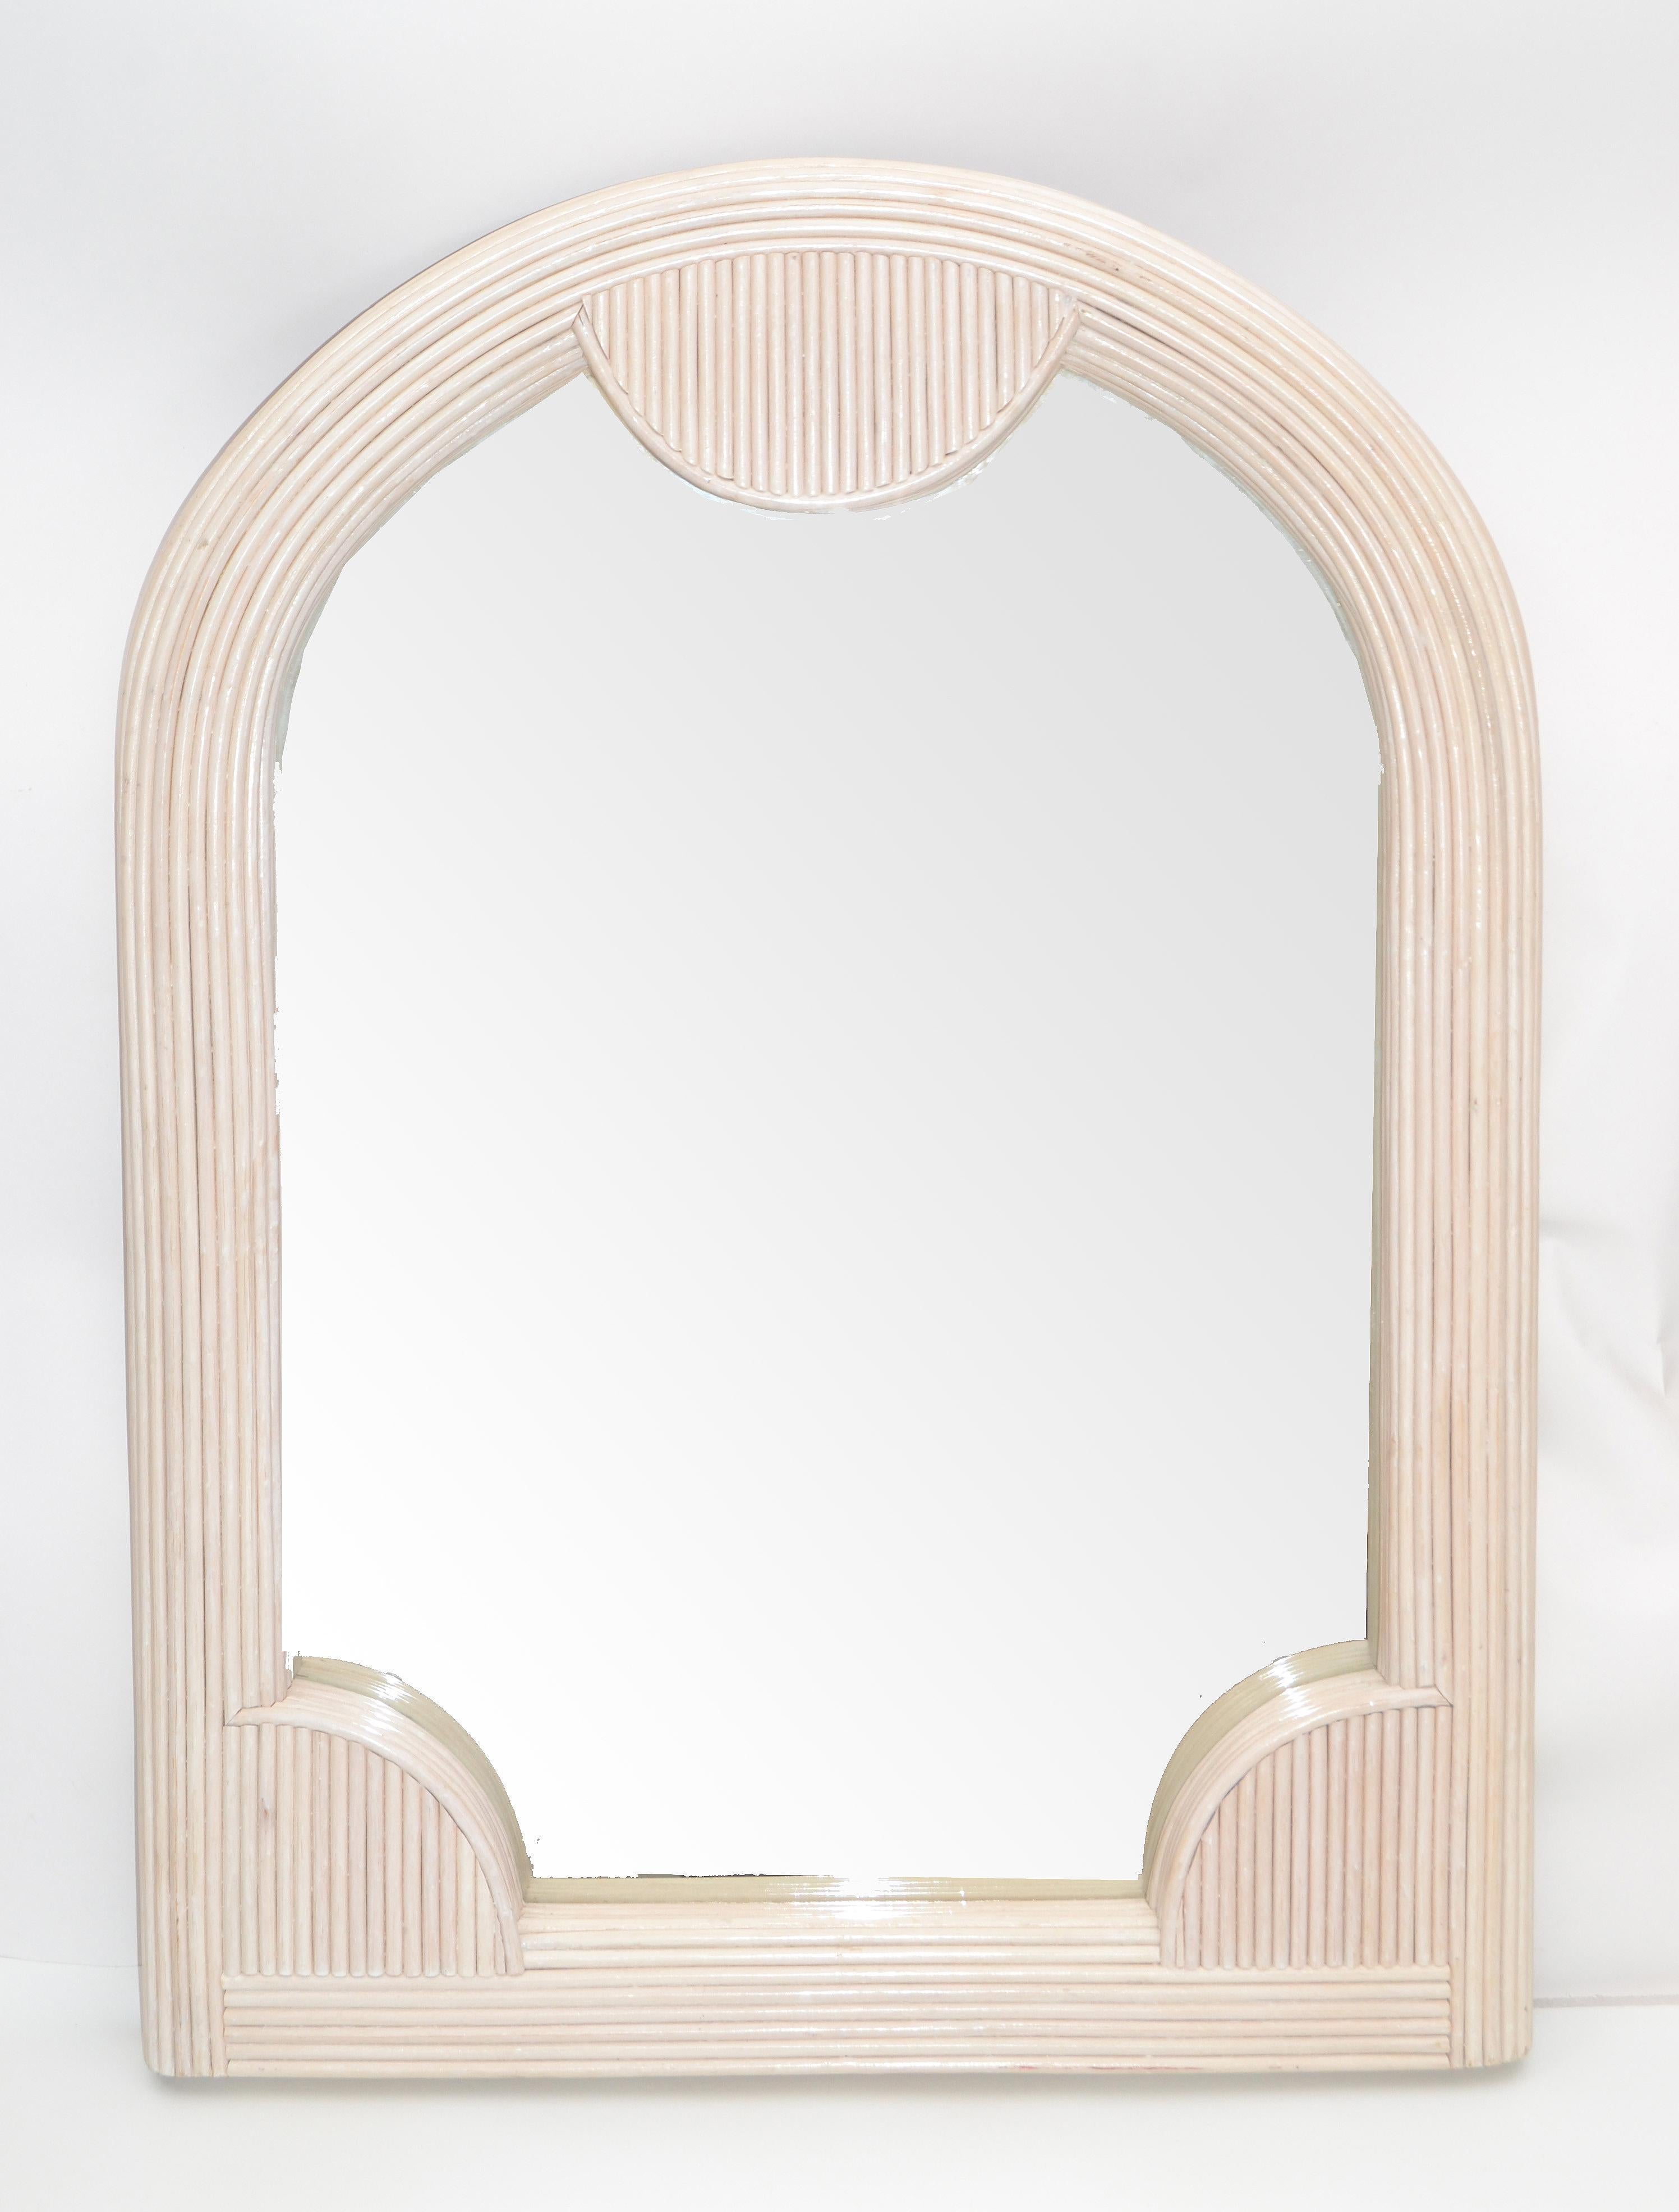 Boho Chic Mid-Century Modern Arch Handmade White Washed Pencil Reed Wall Mirror For Sale 2